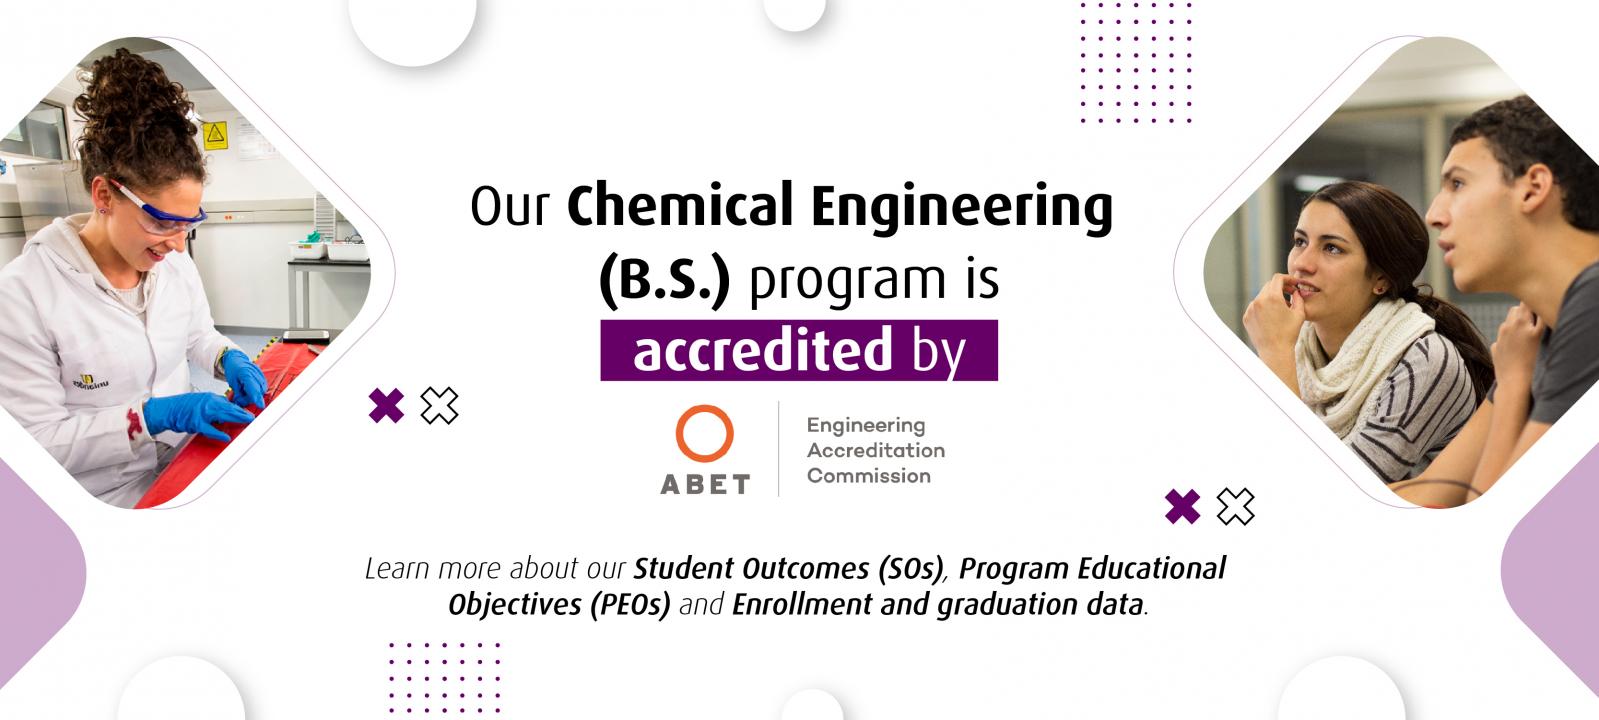 Our Chemical Engineering (B.S) Program is accredited by ABET